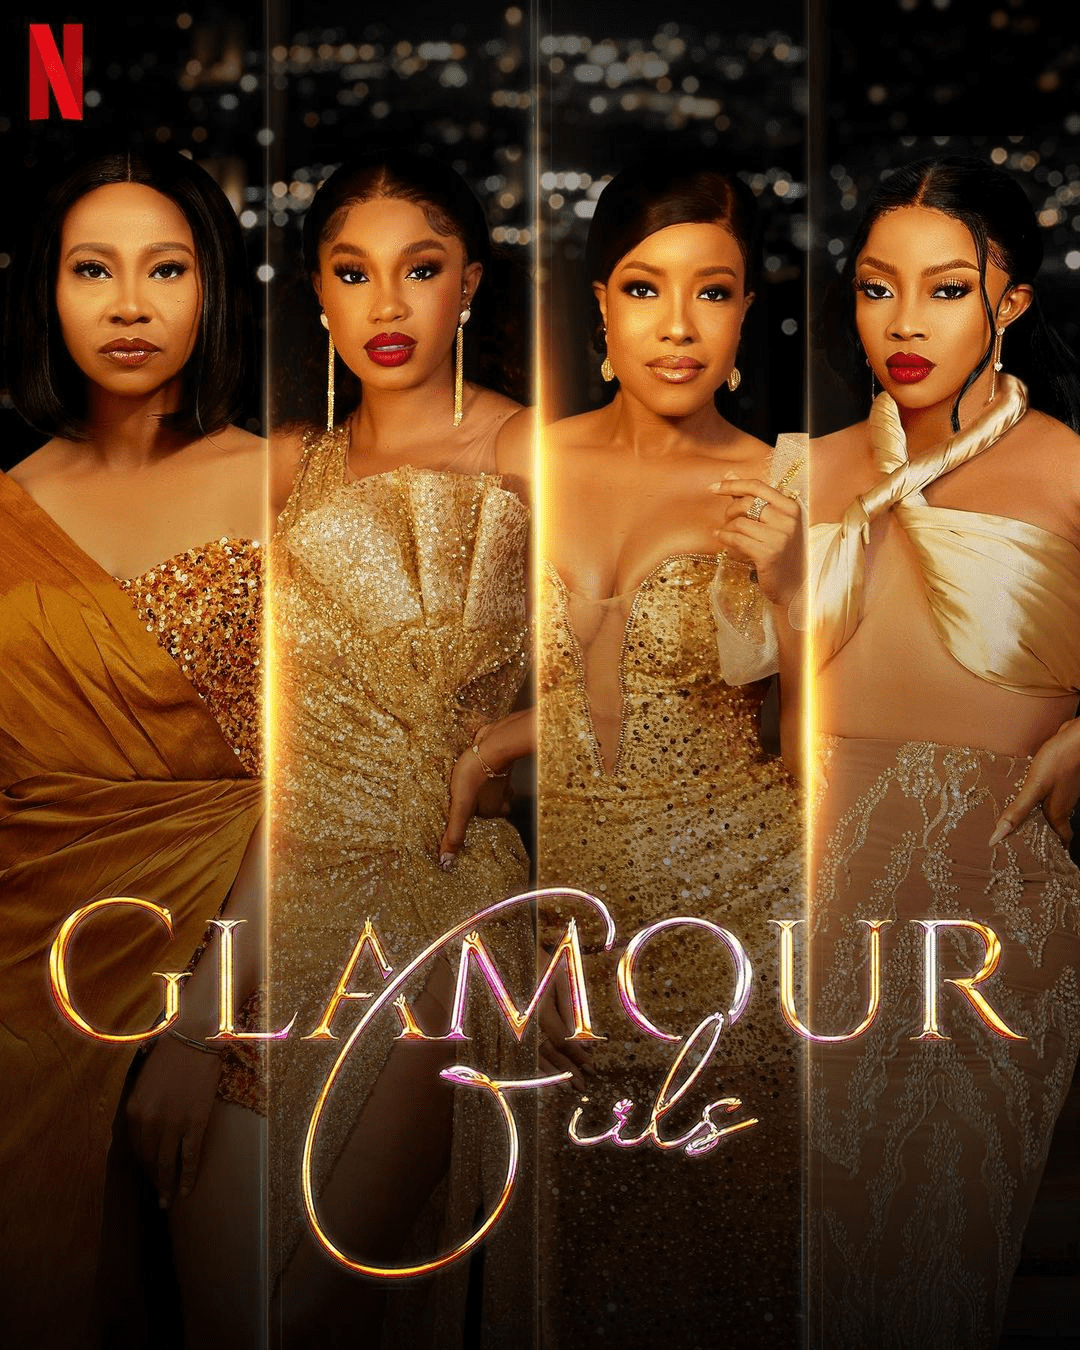 Glamour Girls remake - New Nollywood